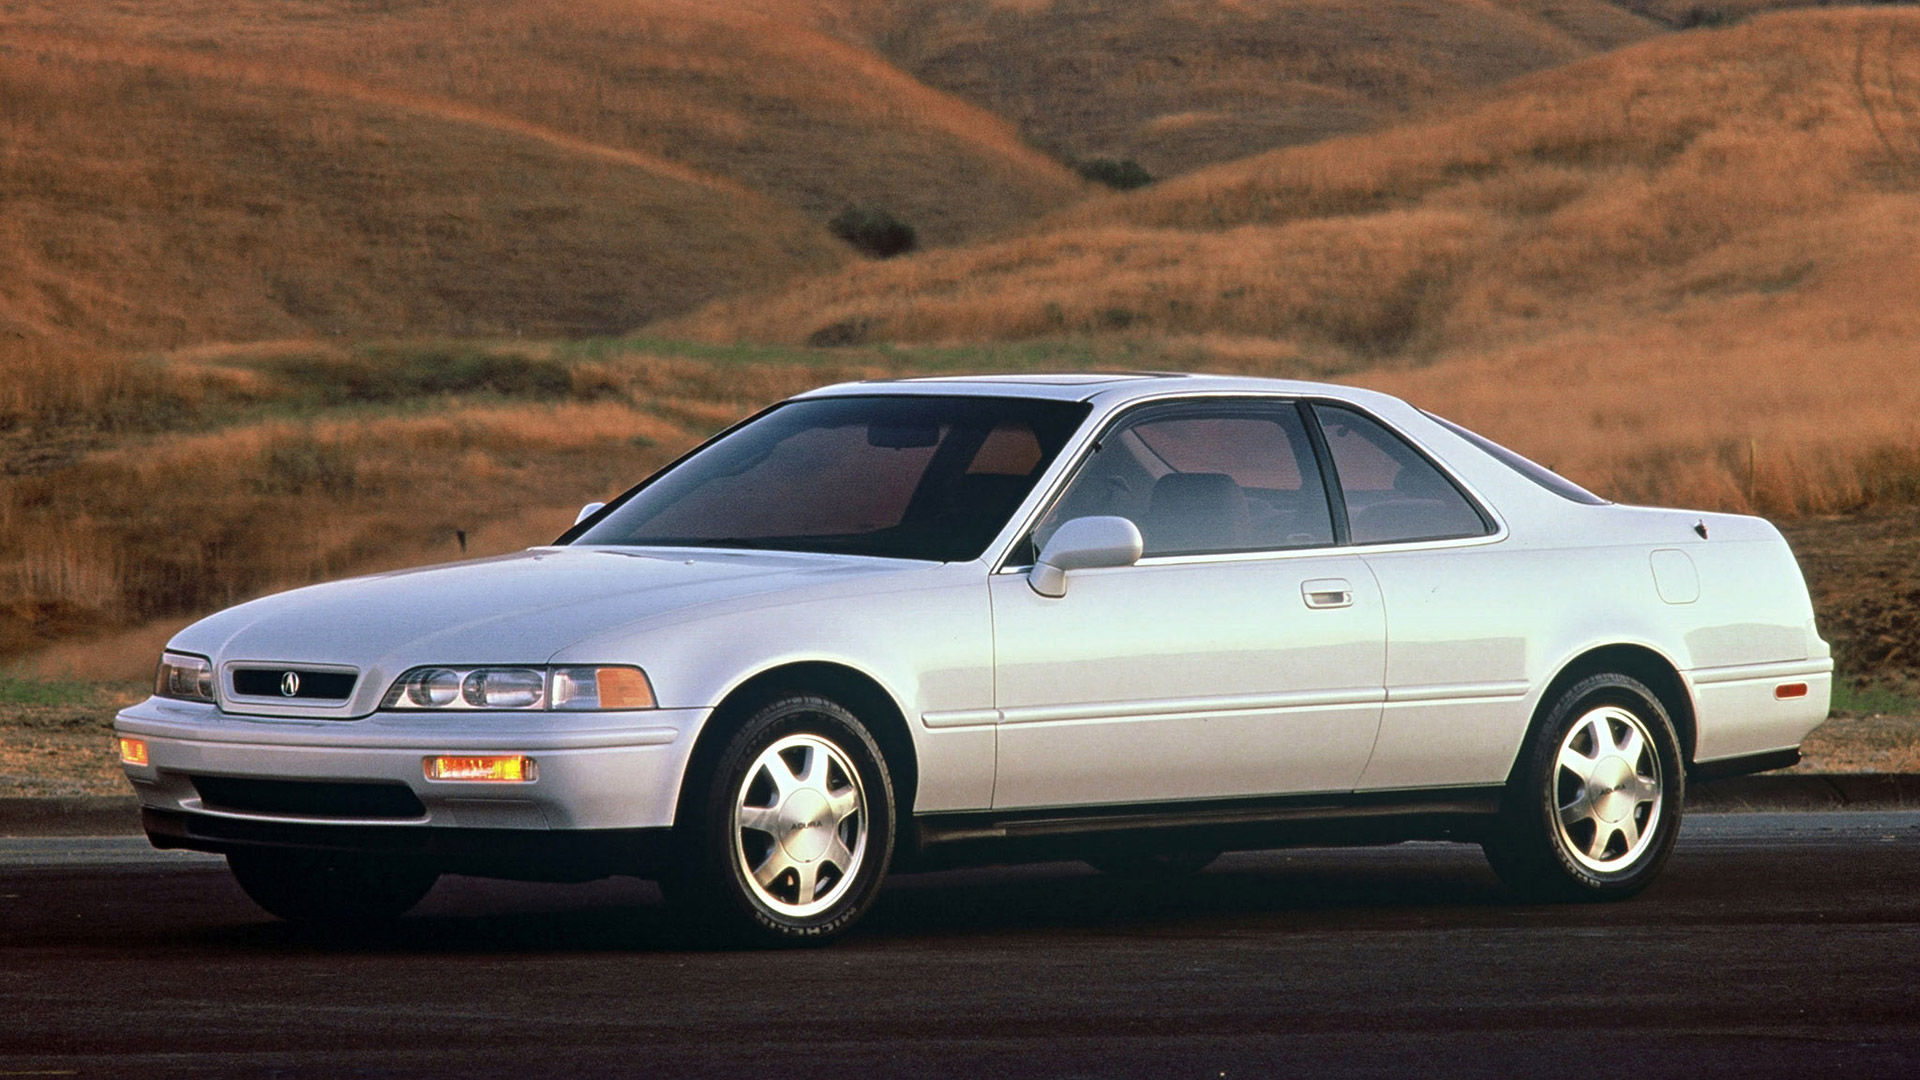 A white Acura Legend coupe sits before rolling hills.